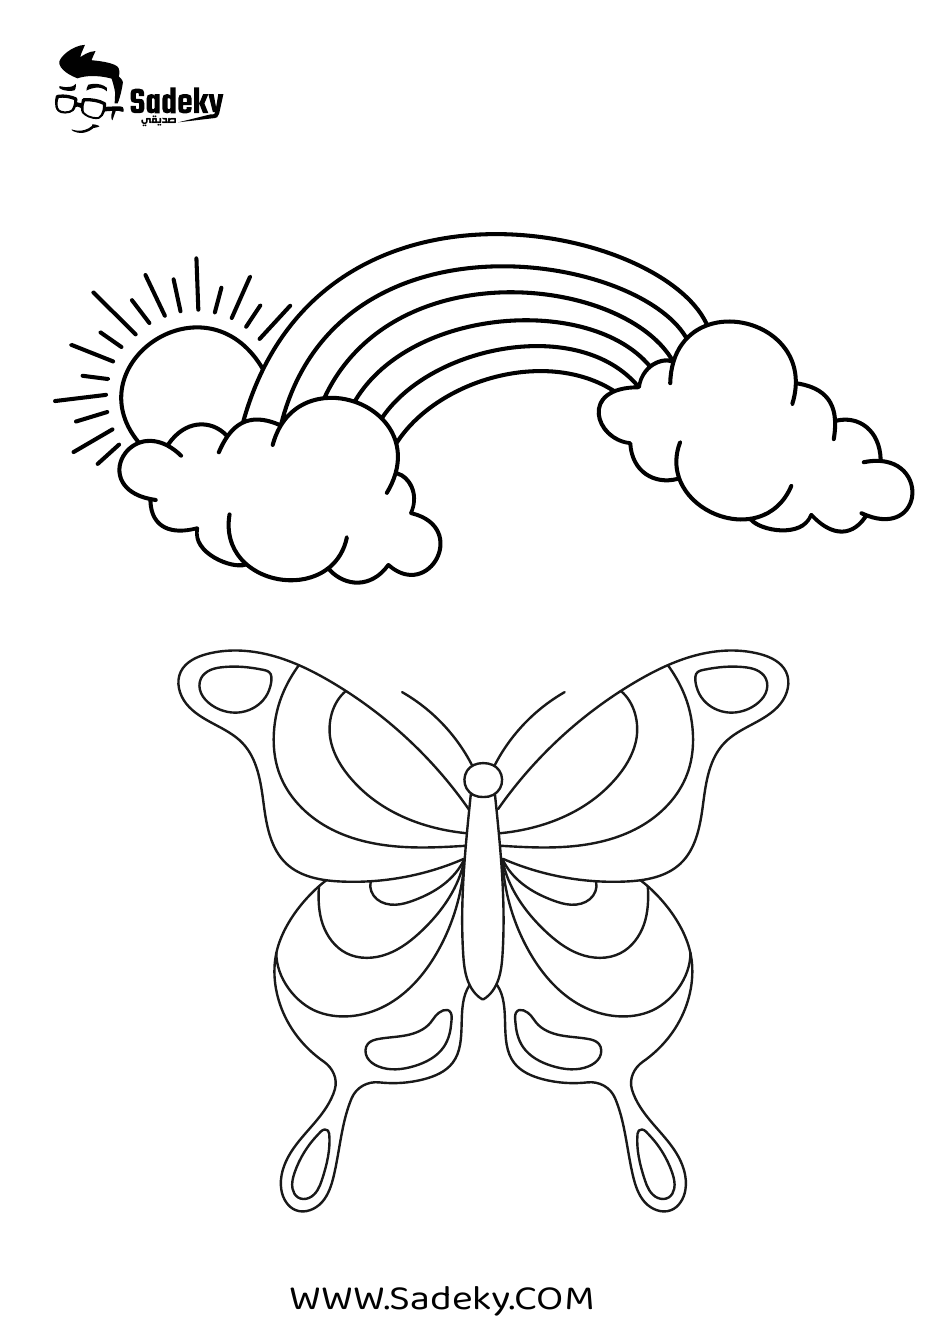 Coloring Page - Butterfly and Rainbow, Page 1